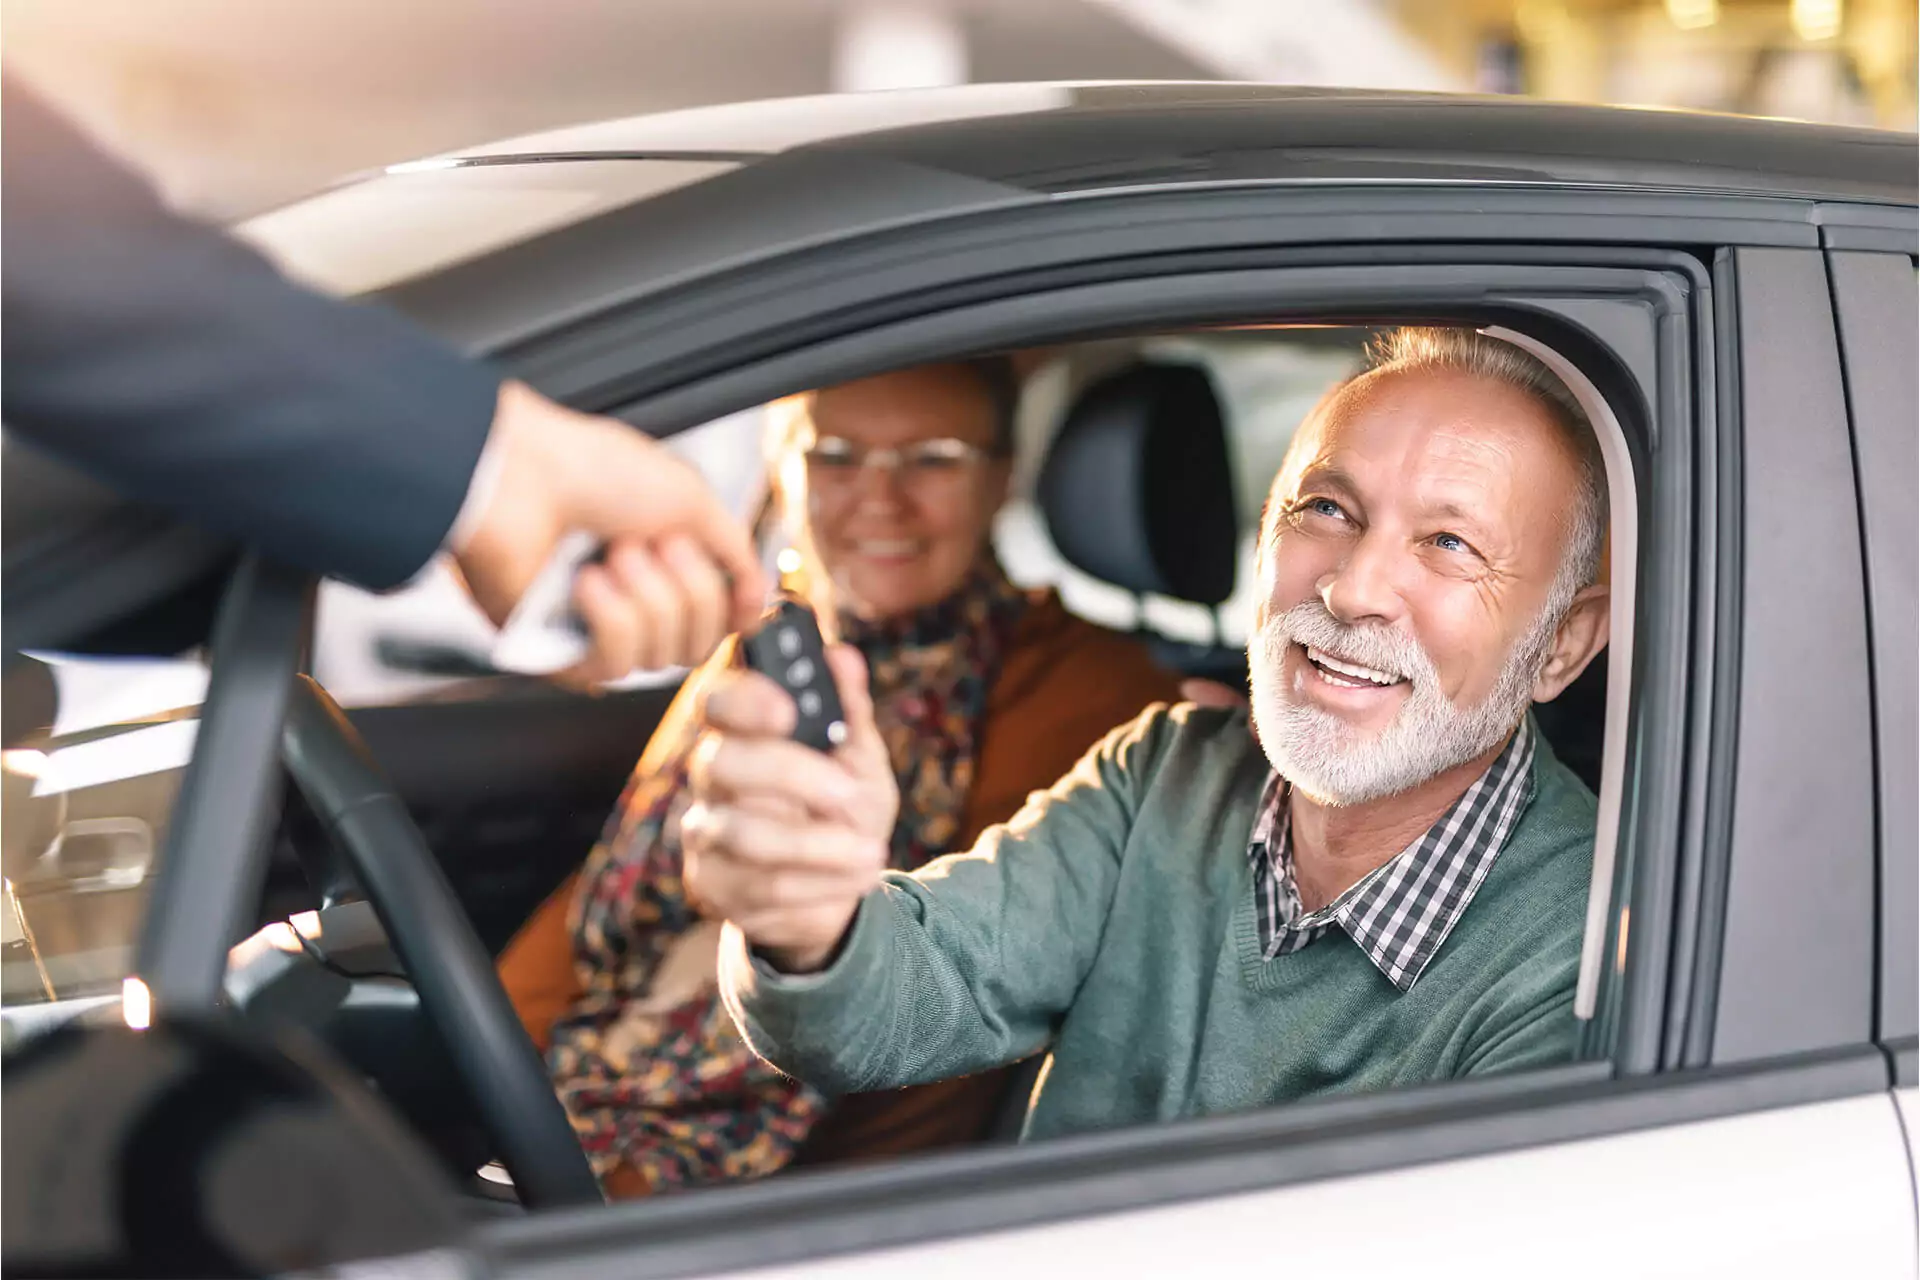 Smiling old man in driver’s seat of a car receiving car keys with woman in passenger seat